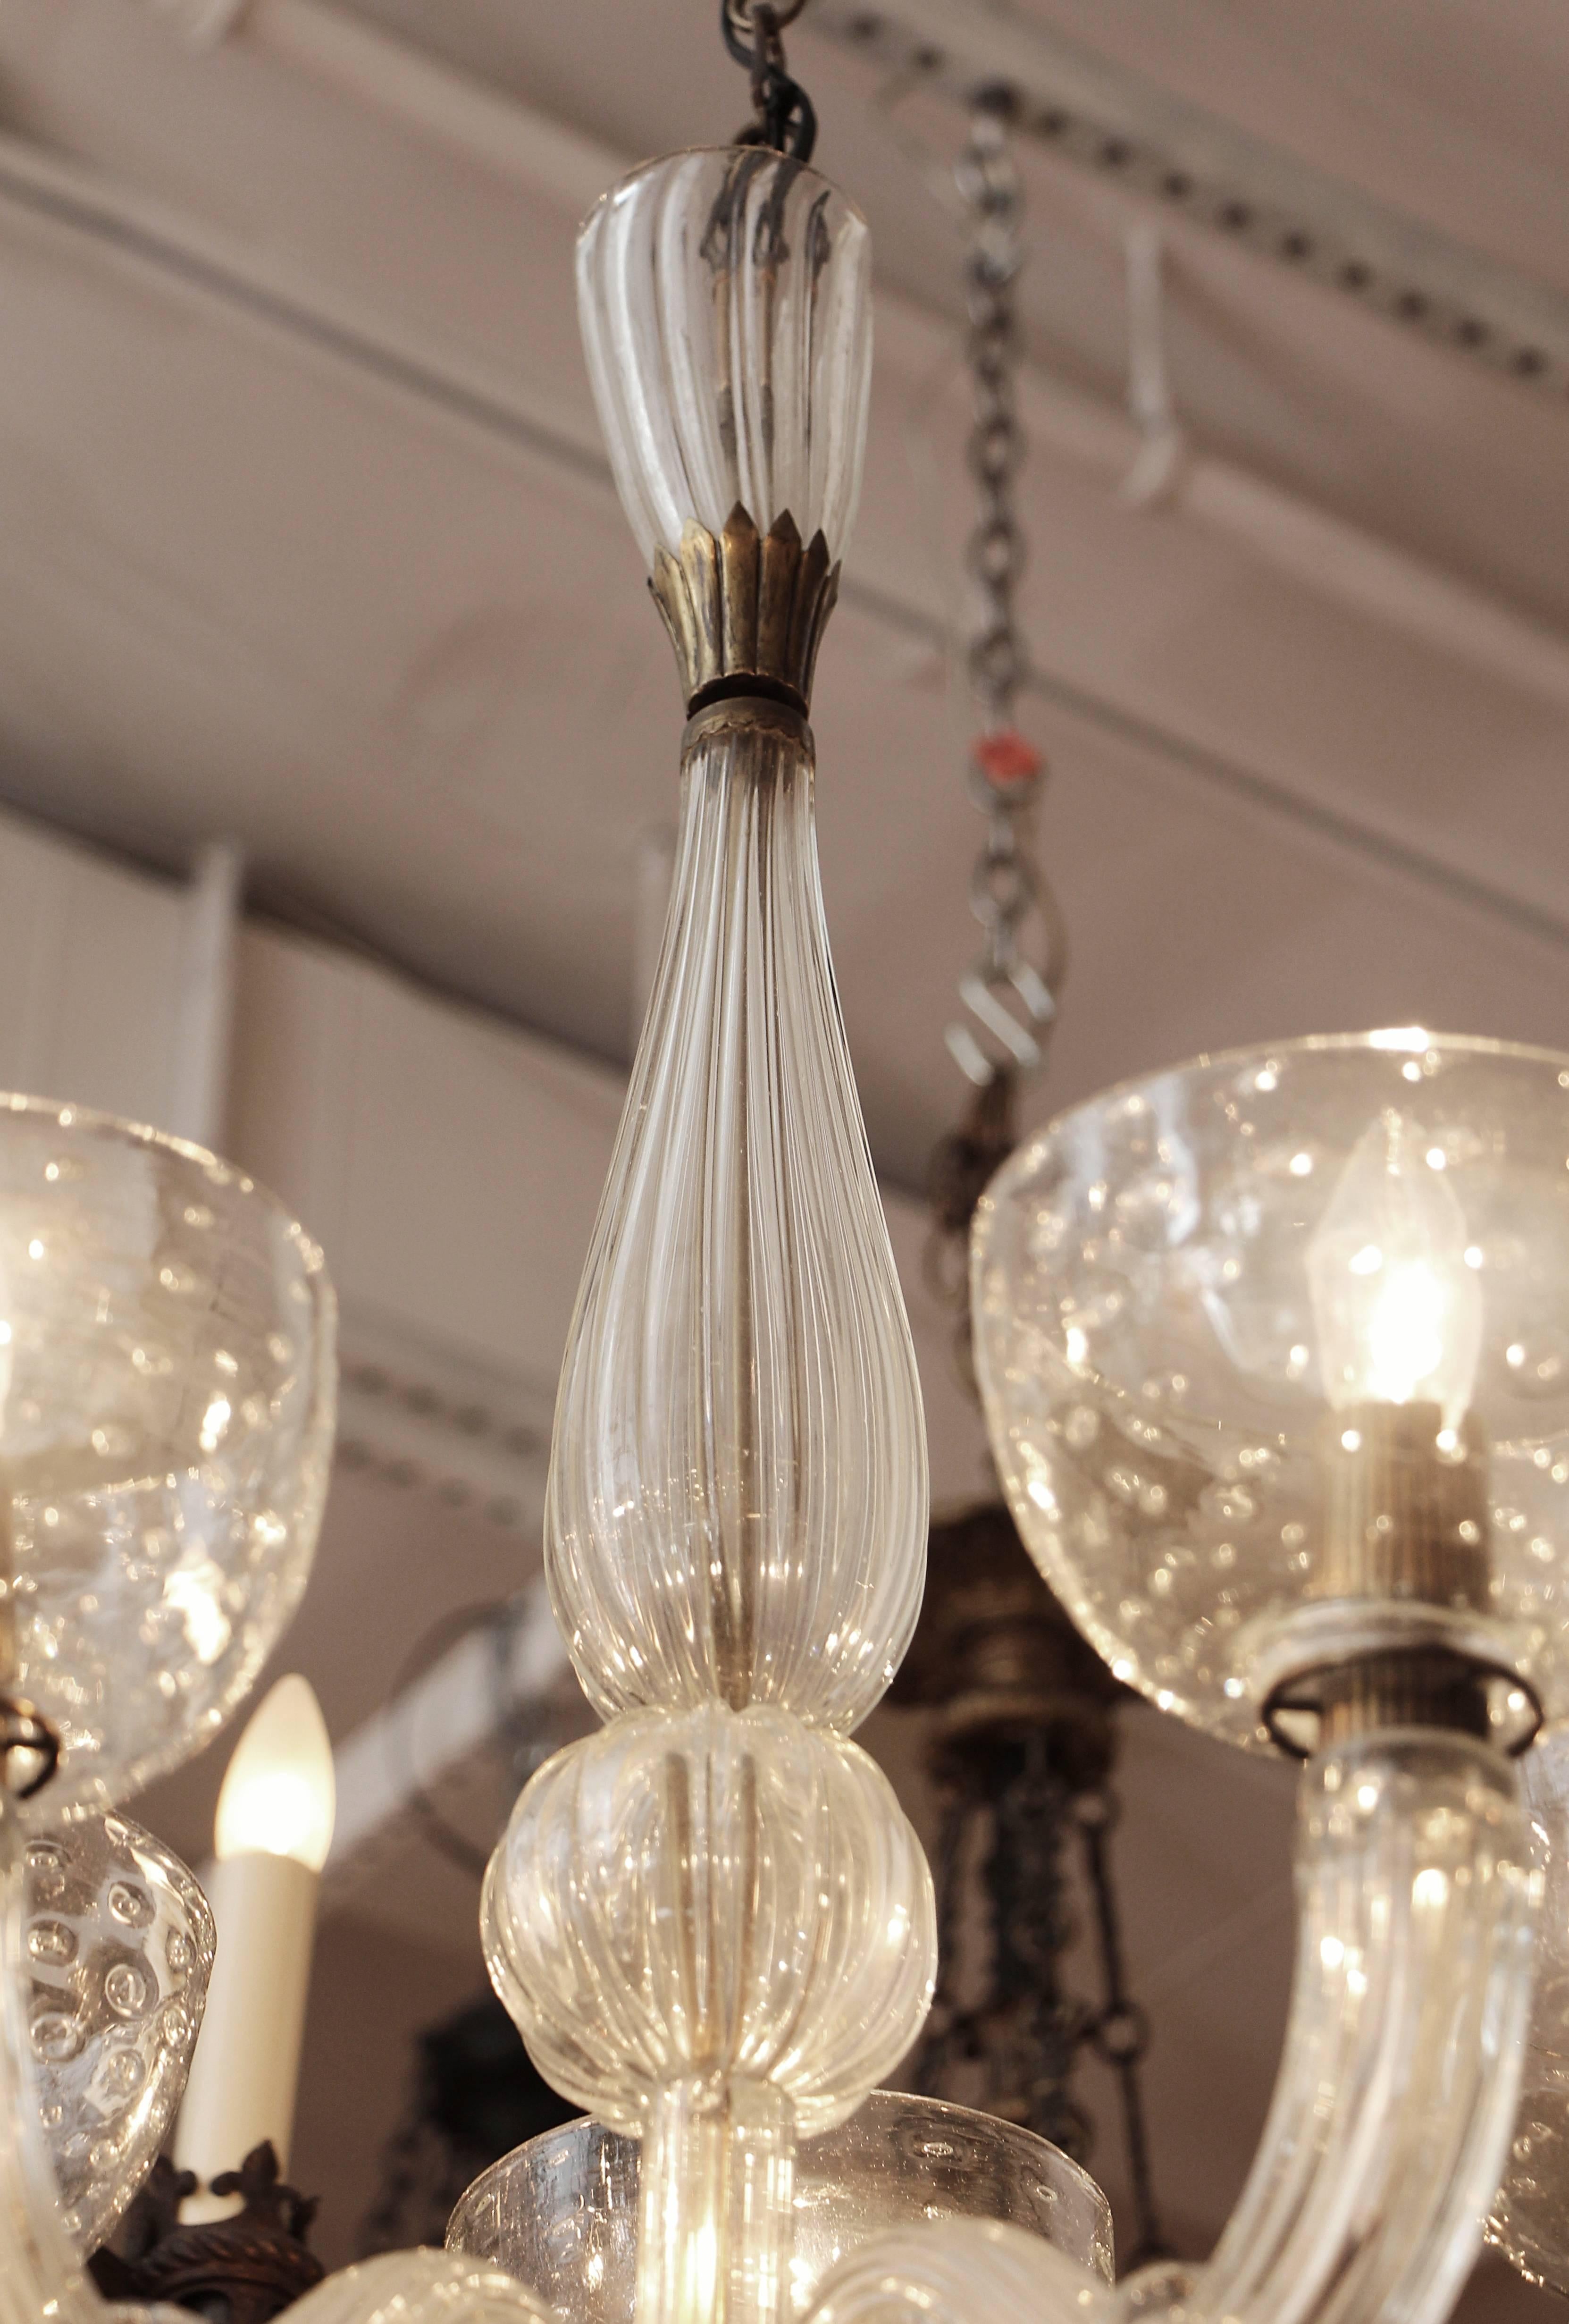 1950s Segusa Italian fluted and bubble blown glass and brass Mid-Century Modern five-arm chandelier. This item can be viewed at our 5 East 16th St, Union Square location in Manhattan.